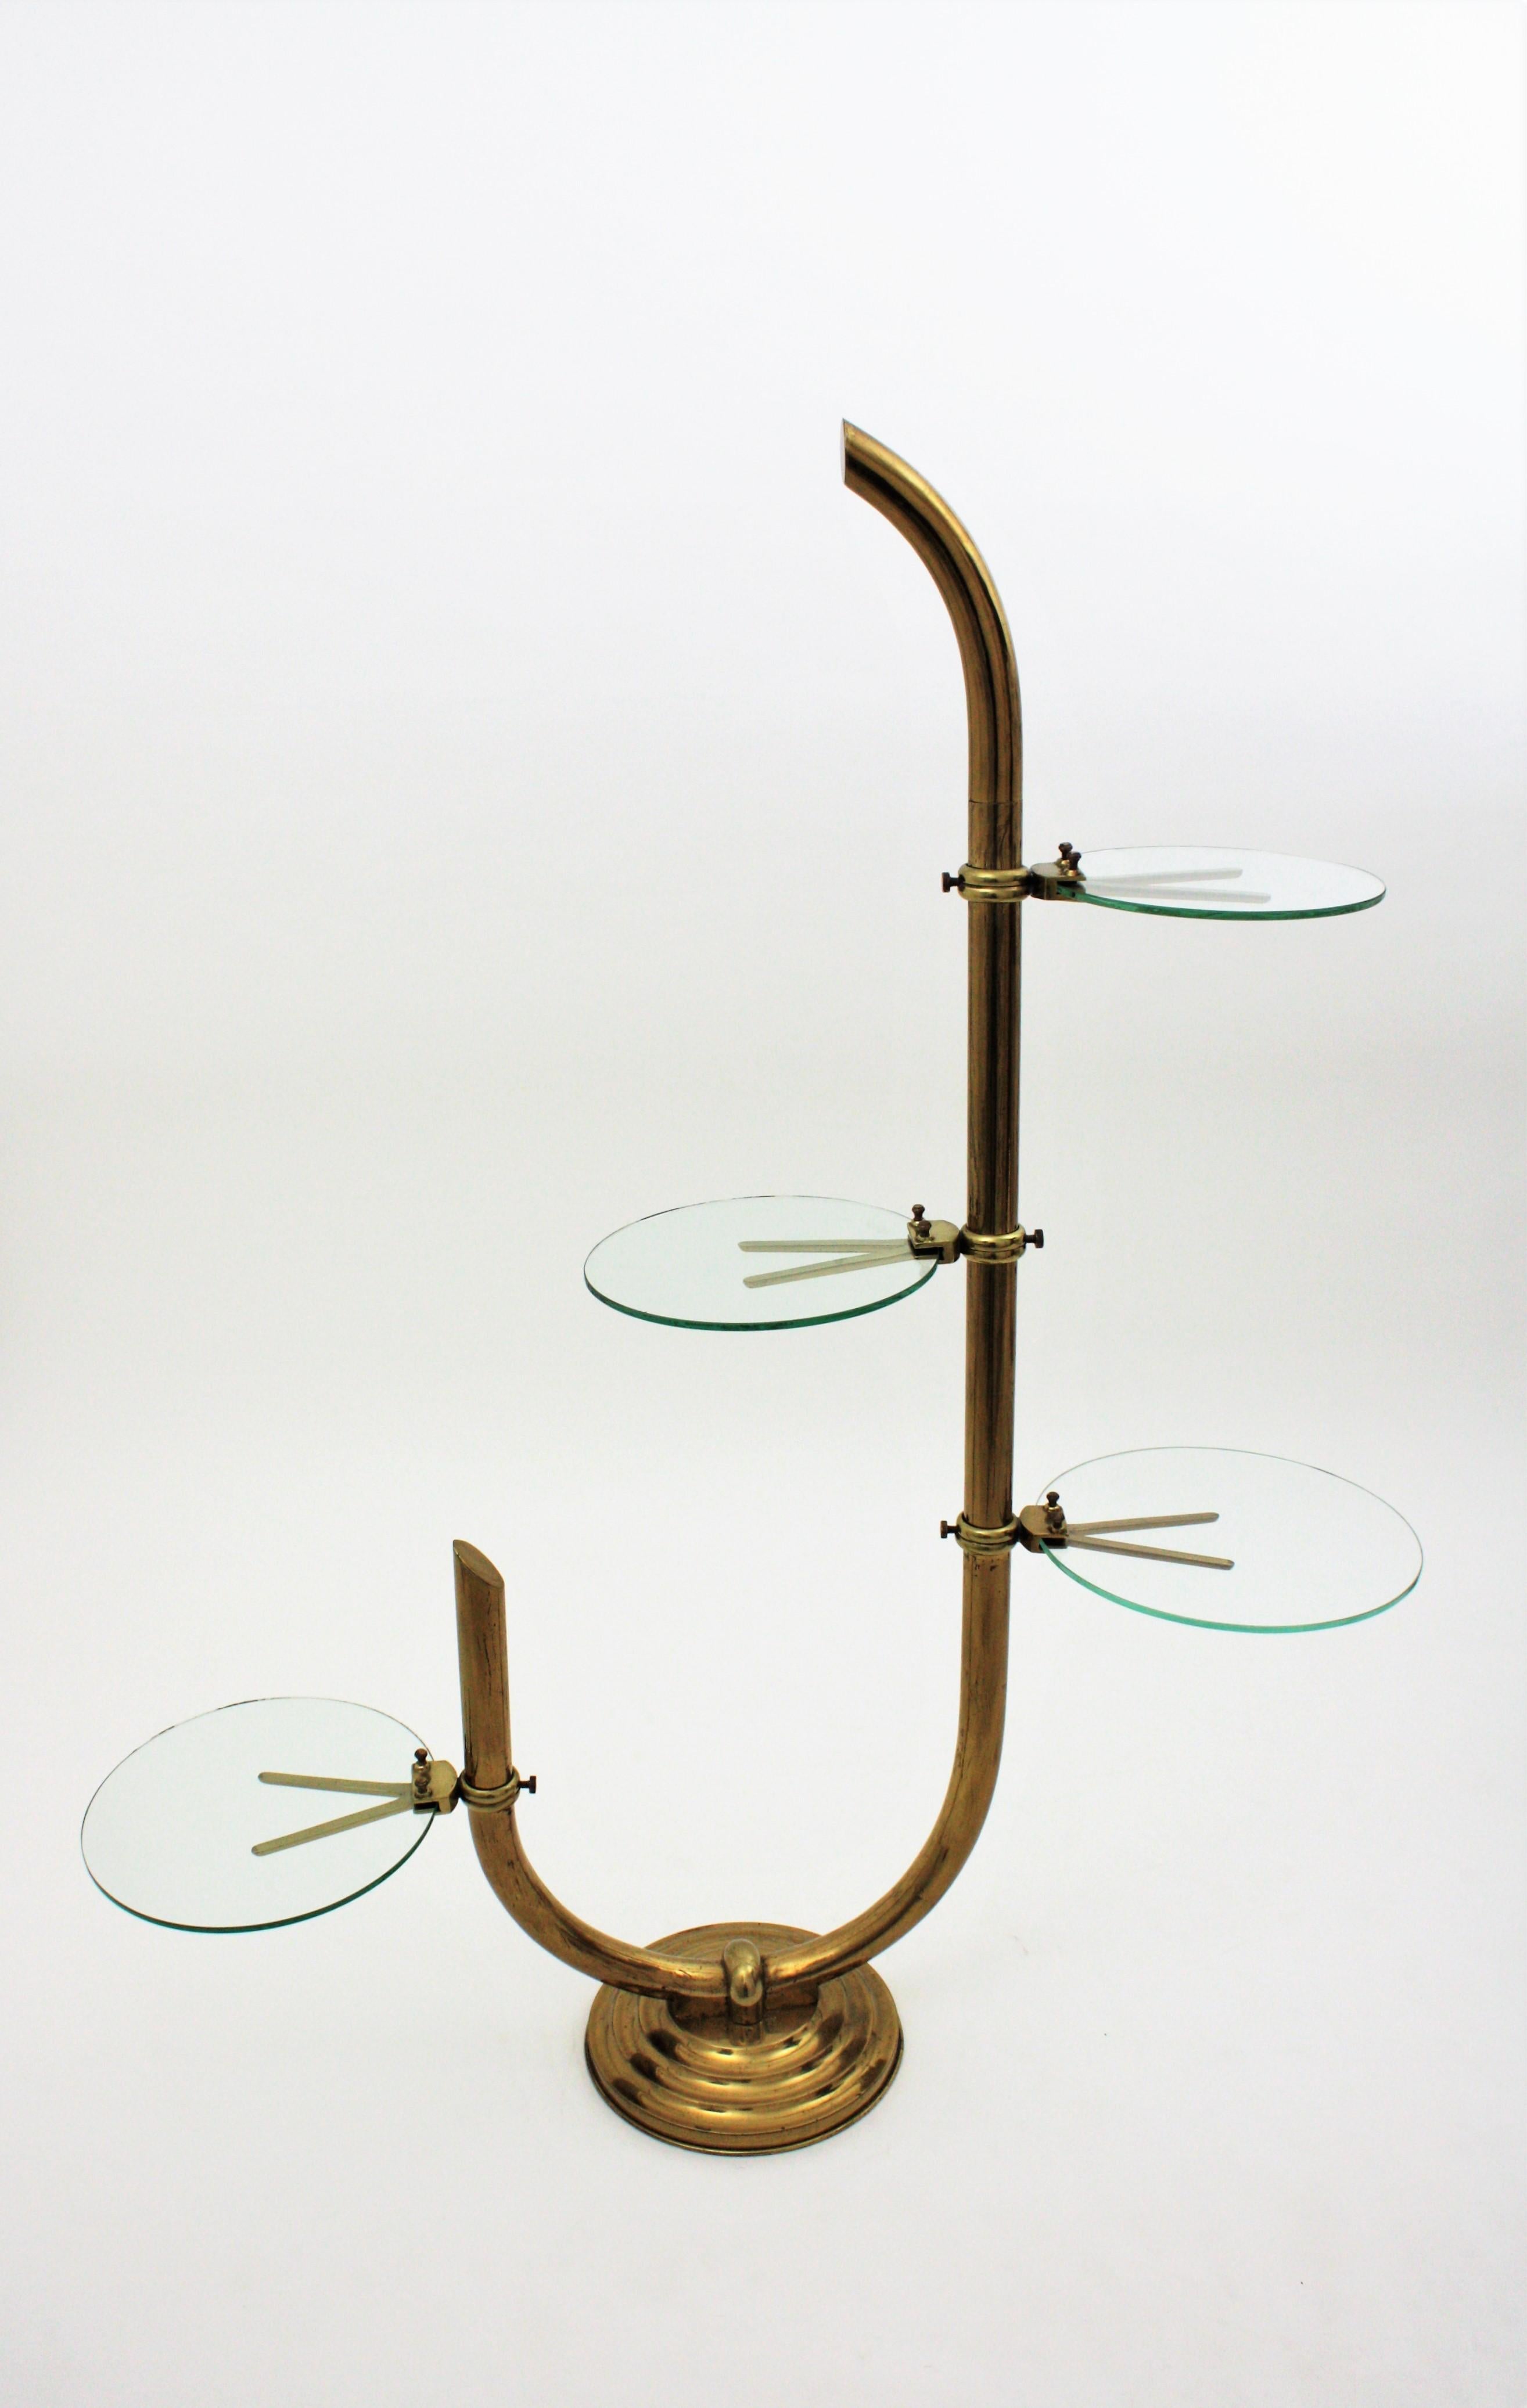 20th Century Art Deco Brass Floor Shop Display Stands / Swivel Etageres with Shelves in Glass